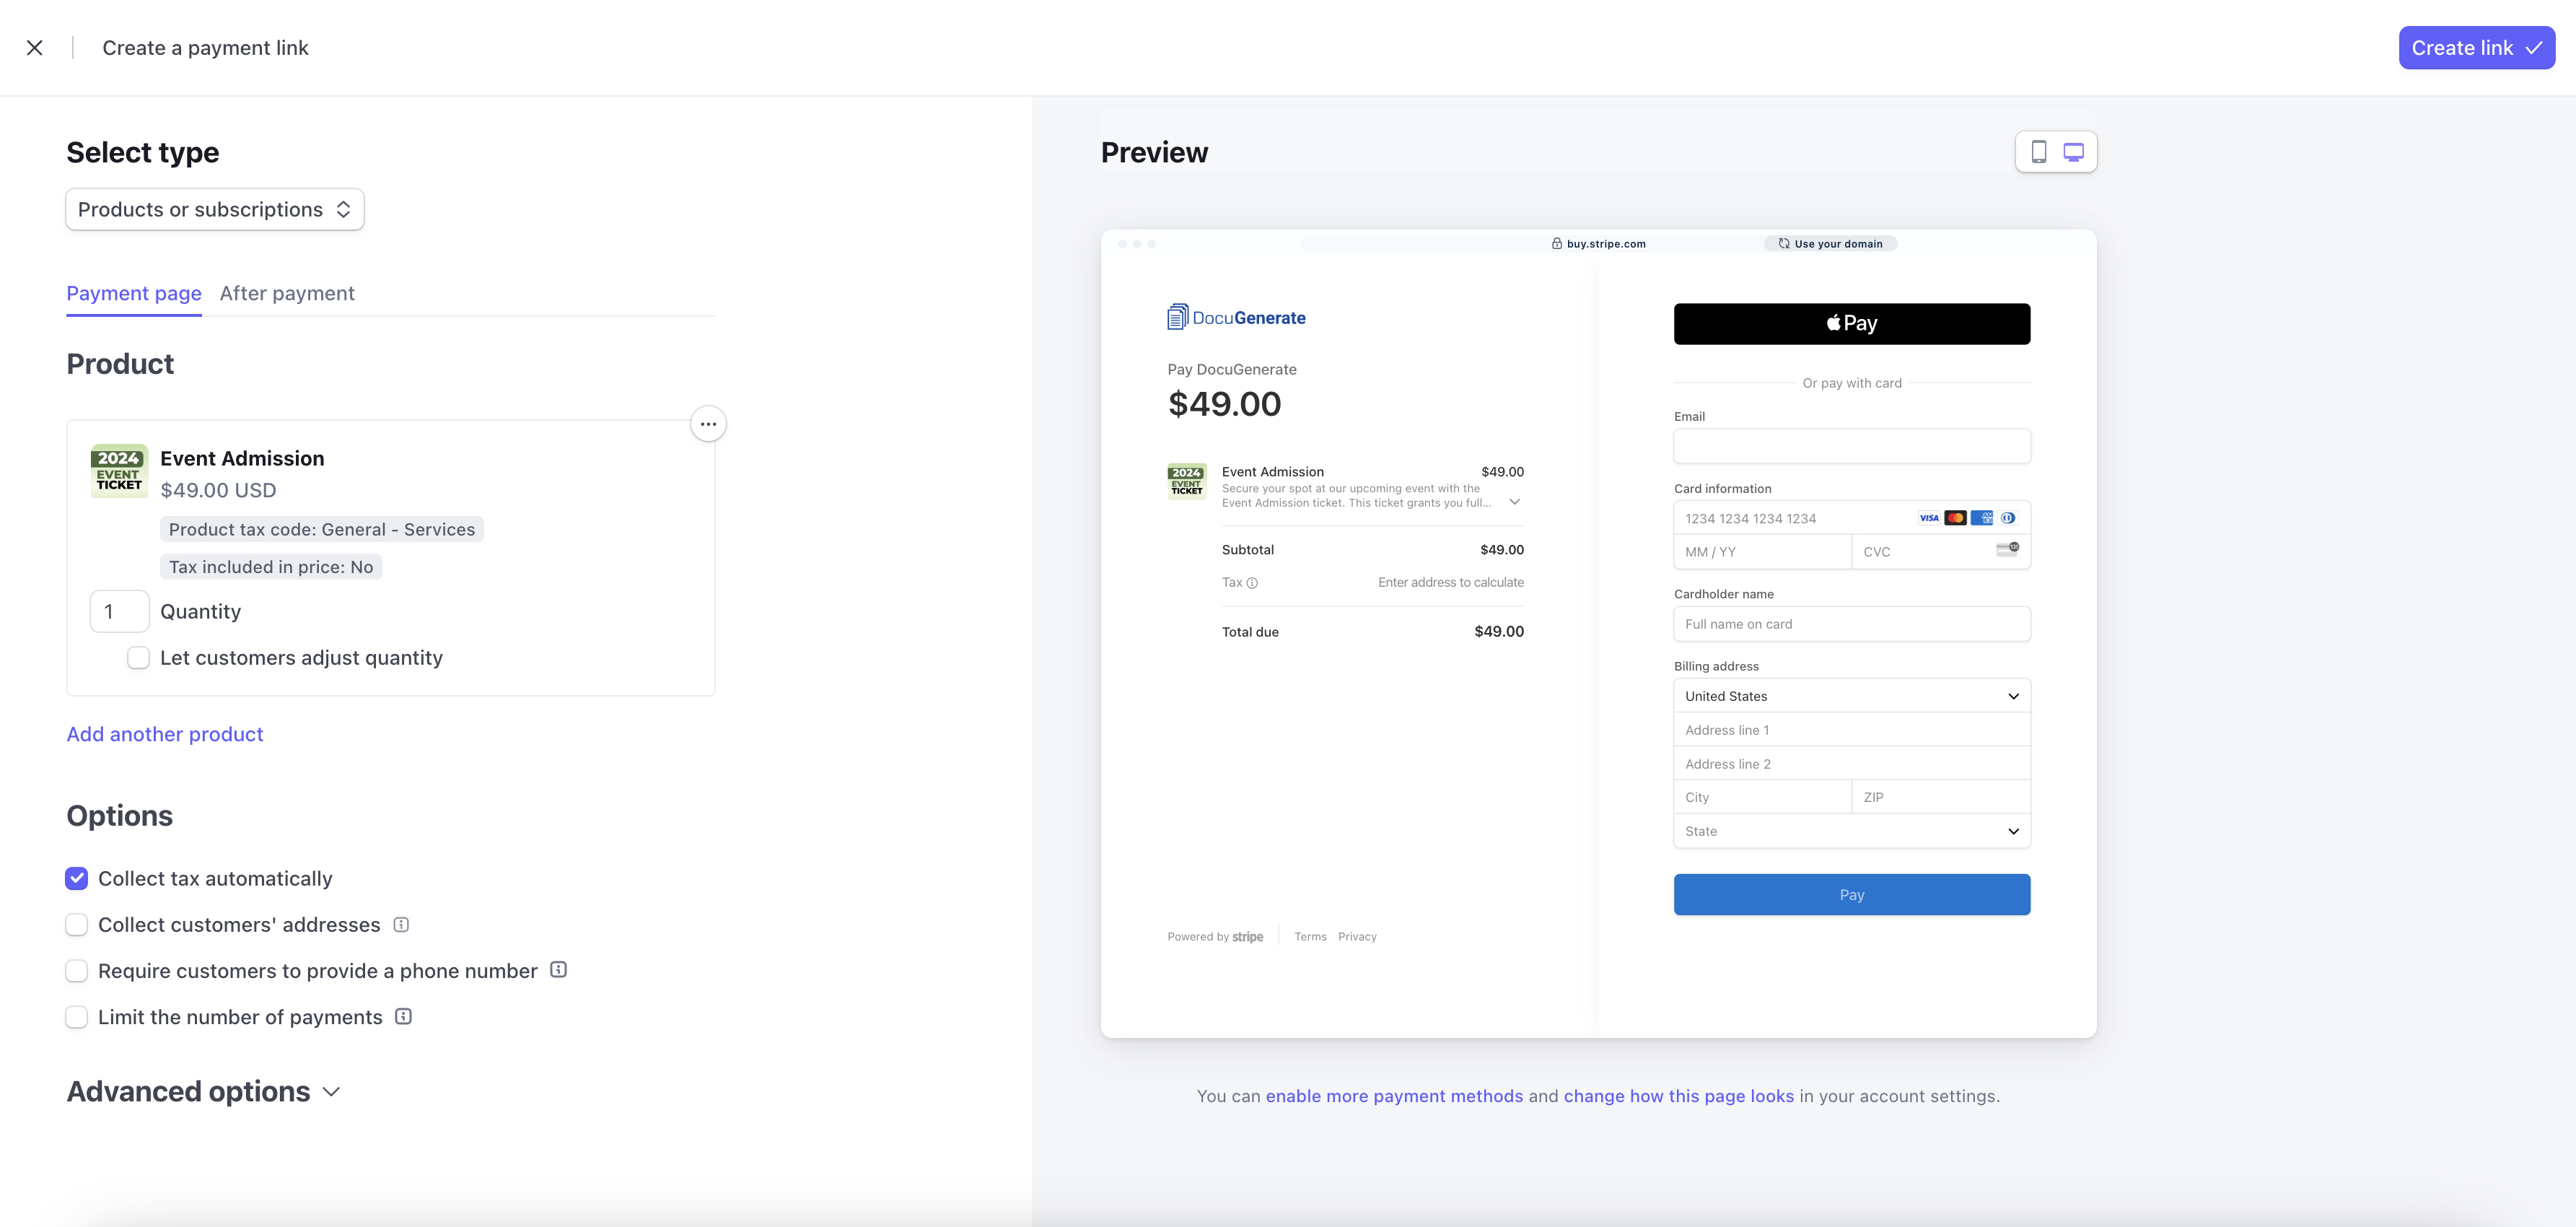 Payment link creation for the "Event Admission" product